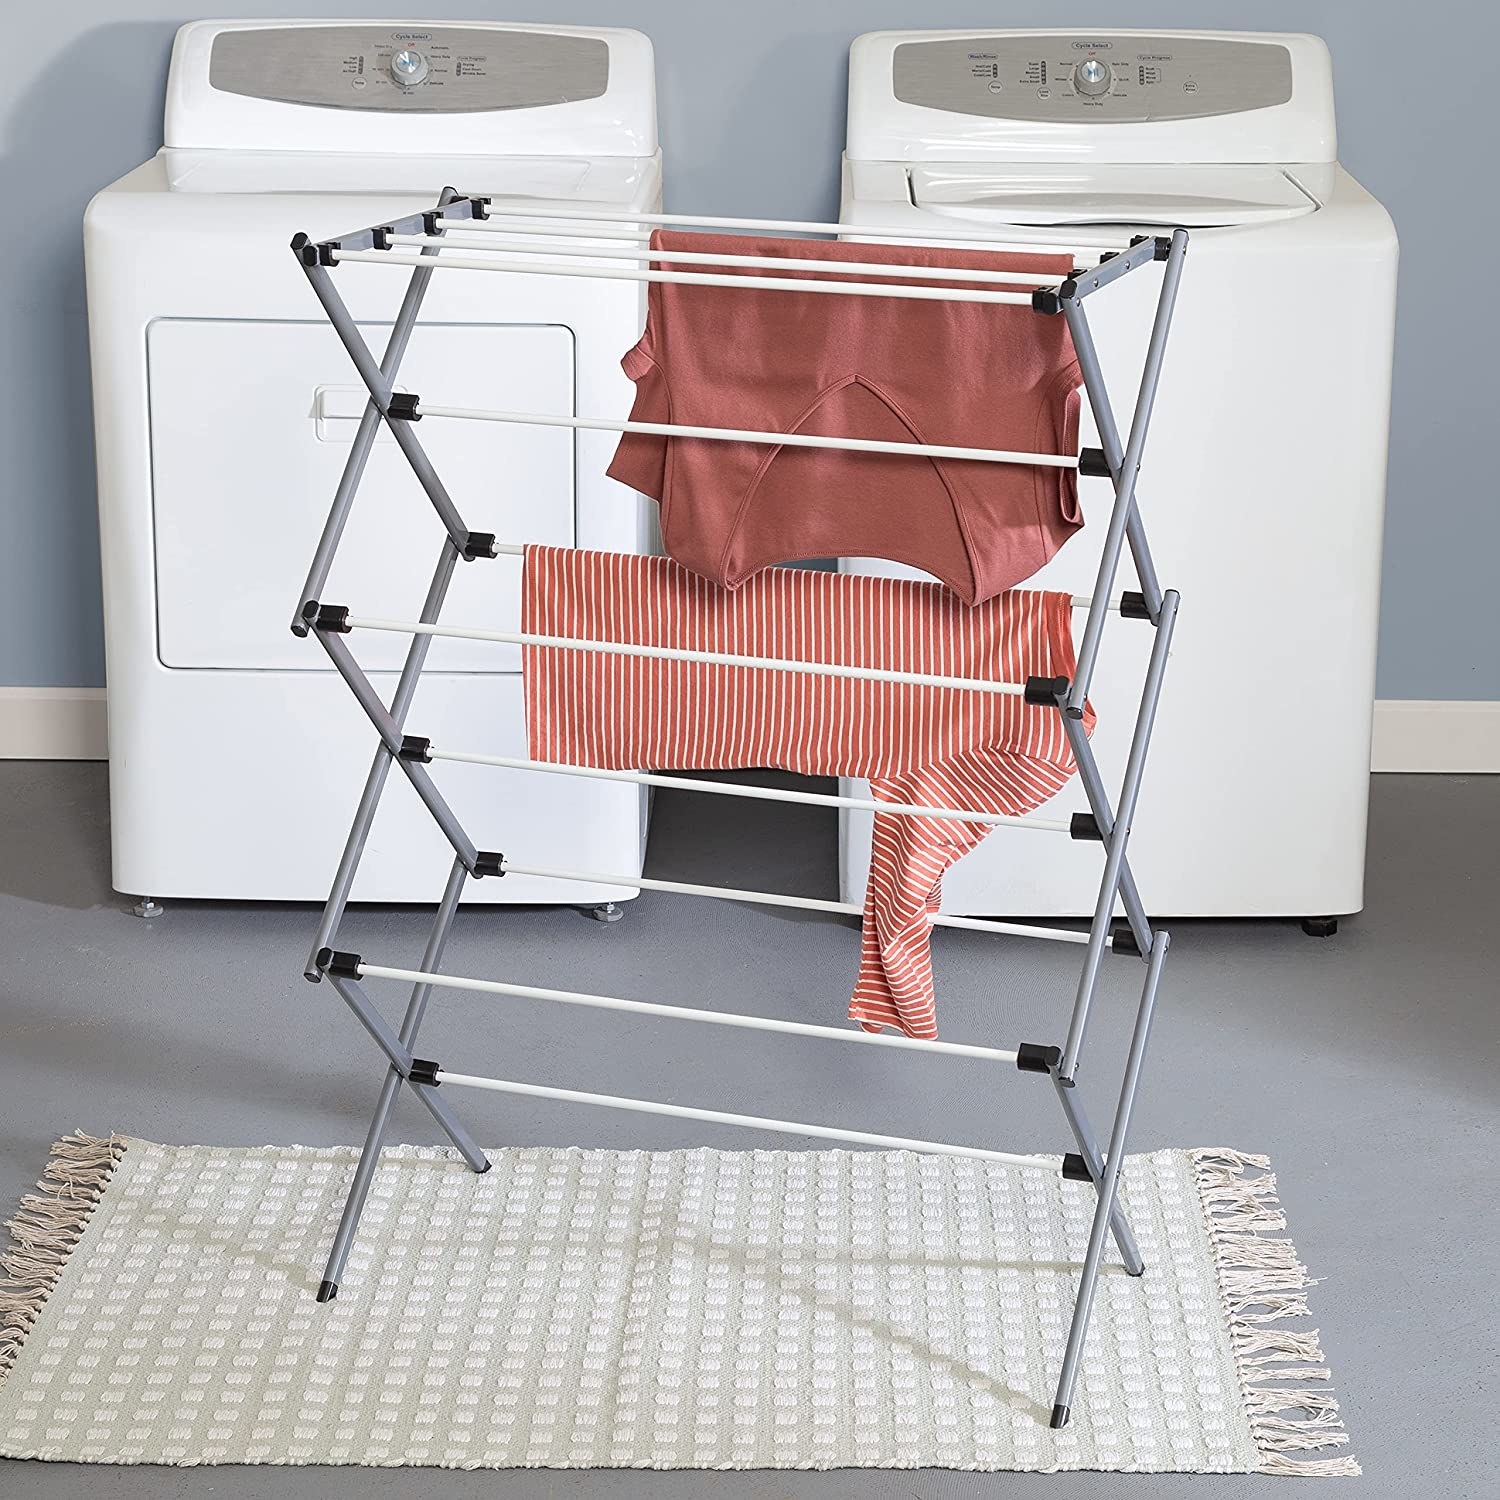 the folding drying rack next to washing machine and dryer